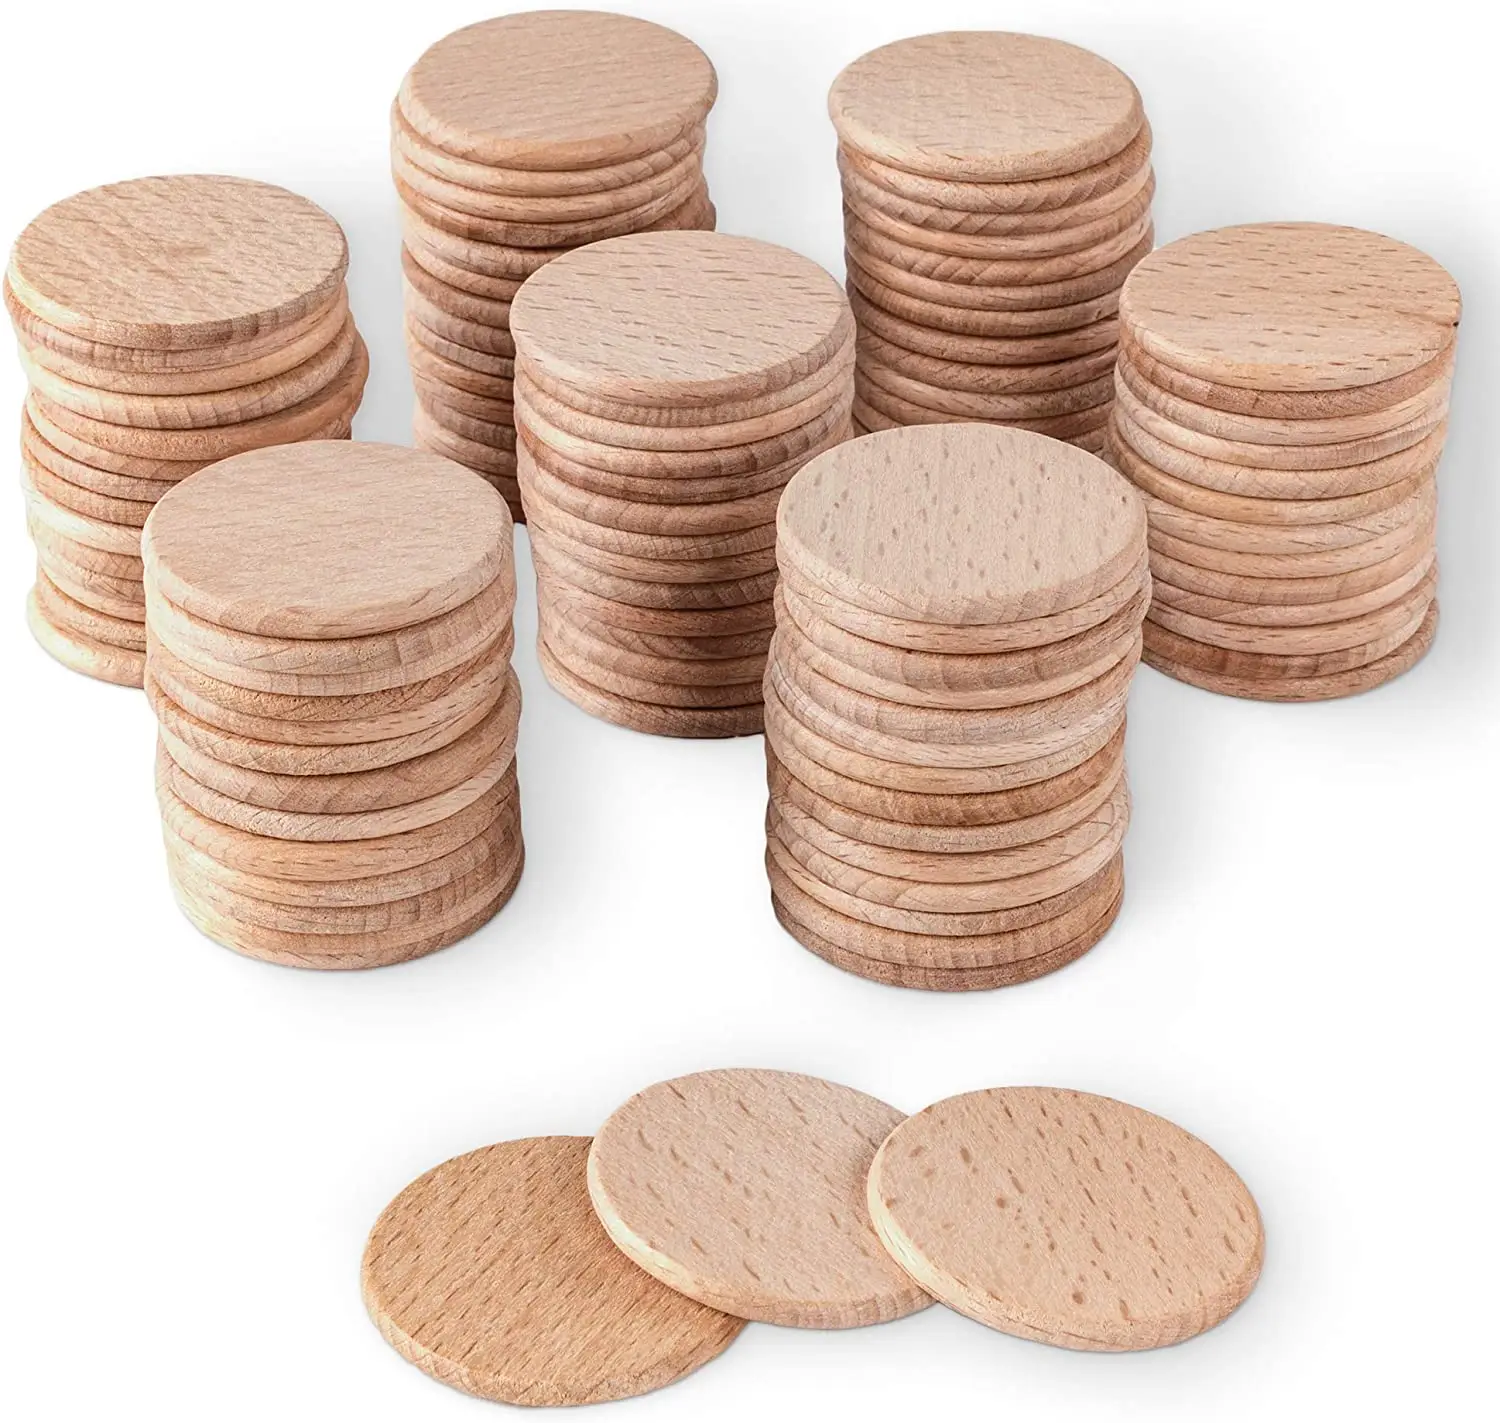 10pcs Round Discs Natural Round Wood Slices Circles with Tree Bark Log Discs for DIY Crafts Wedding Party Decoration